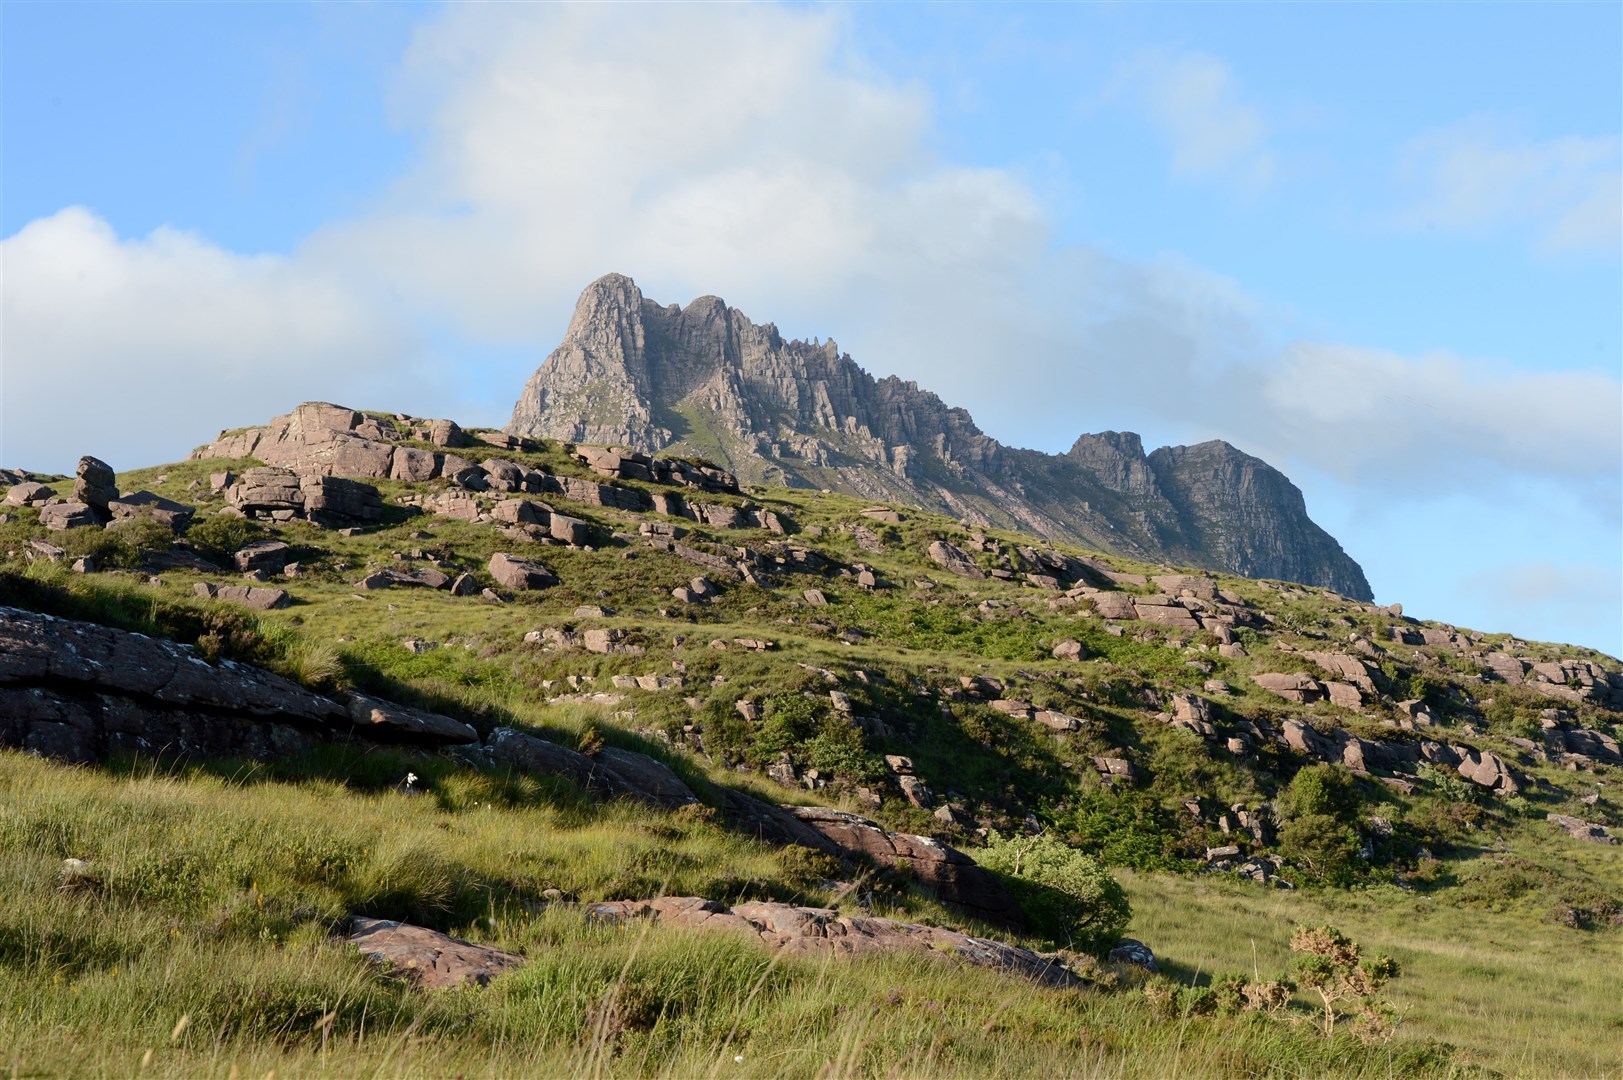 A view of Stac Pollaidh from the Achiltibuie to Ullapool road.